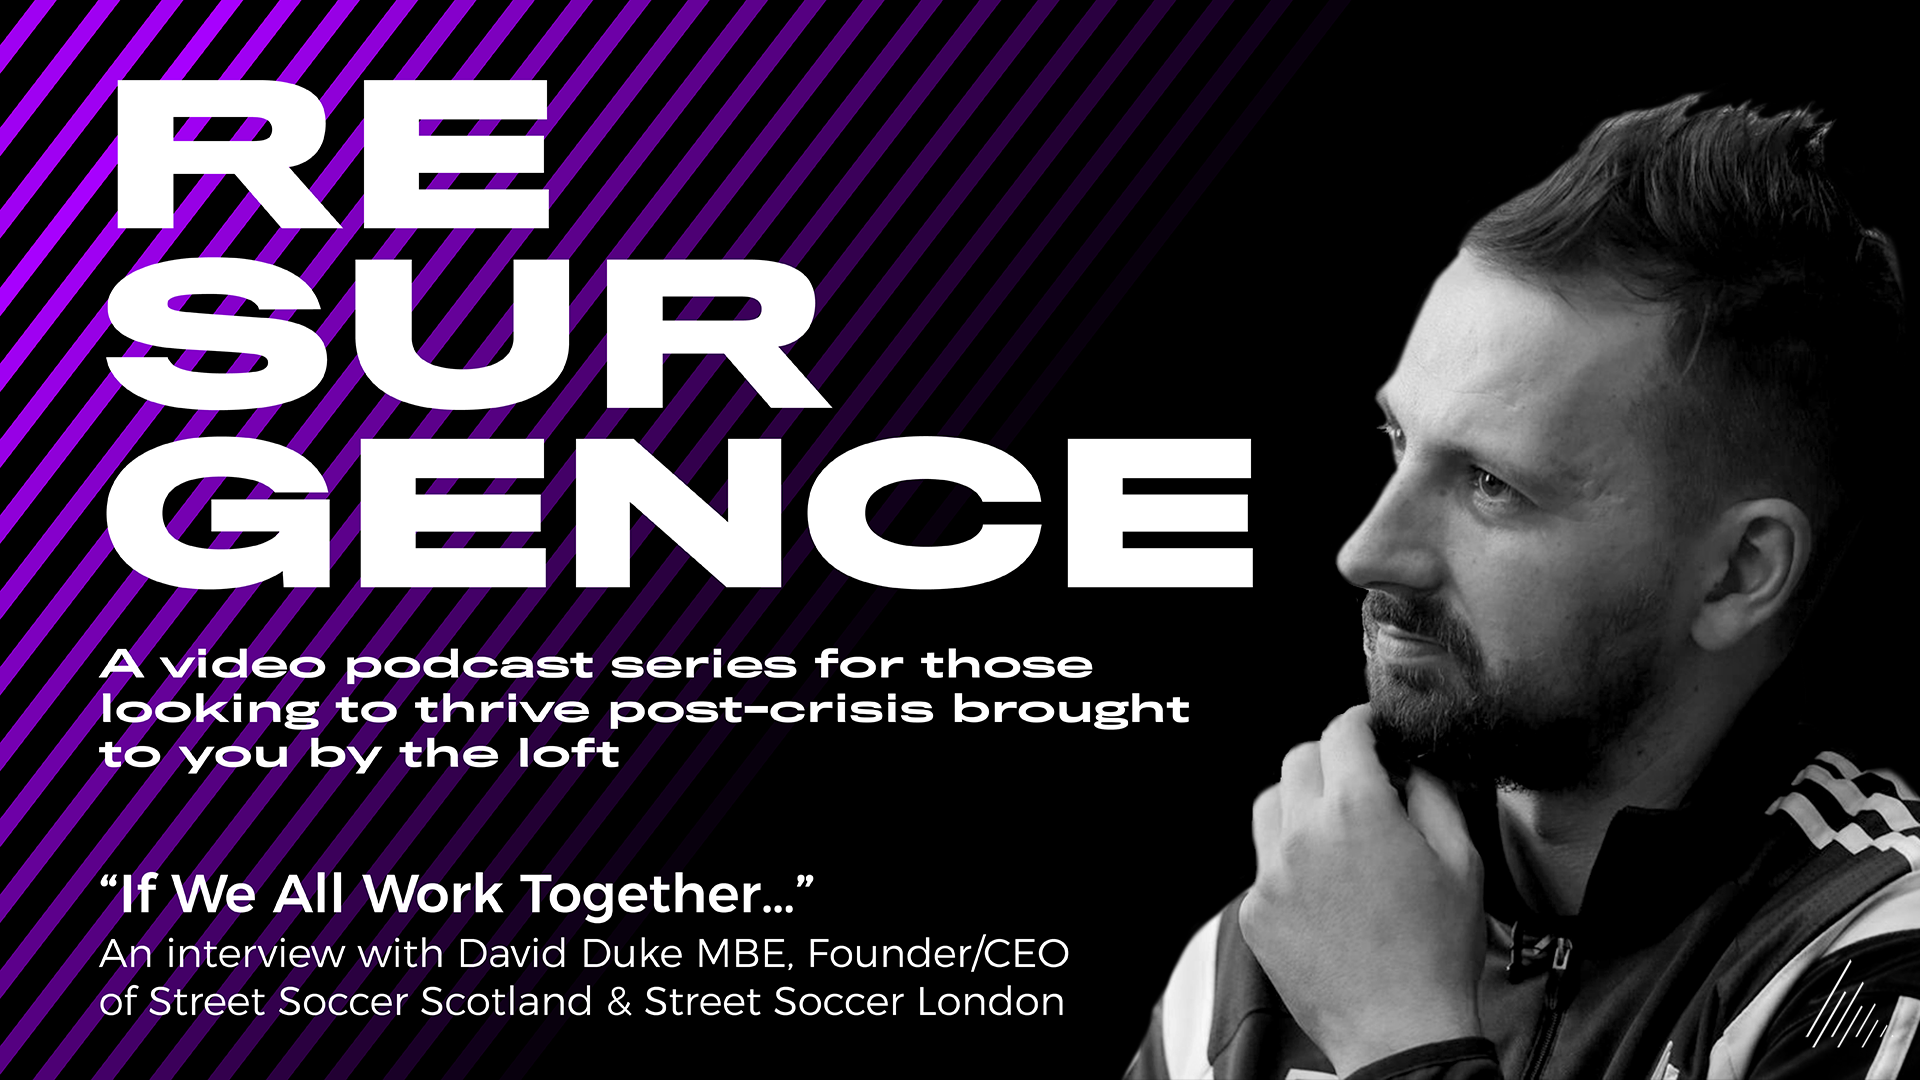 ‘Resurgence with David Duke’ Some insights and inspirations during Covid.